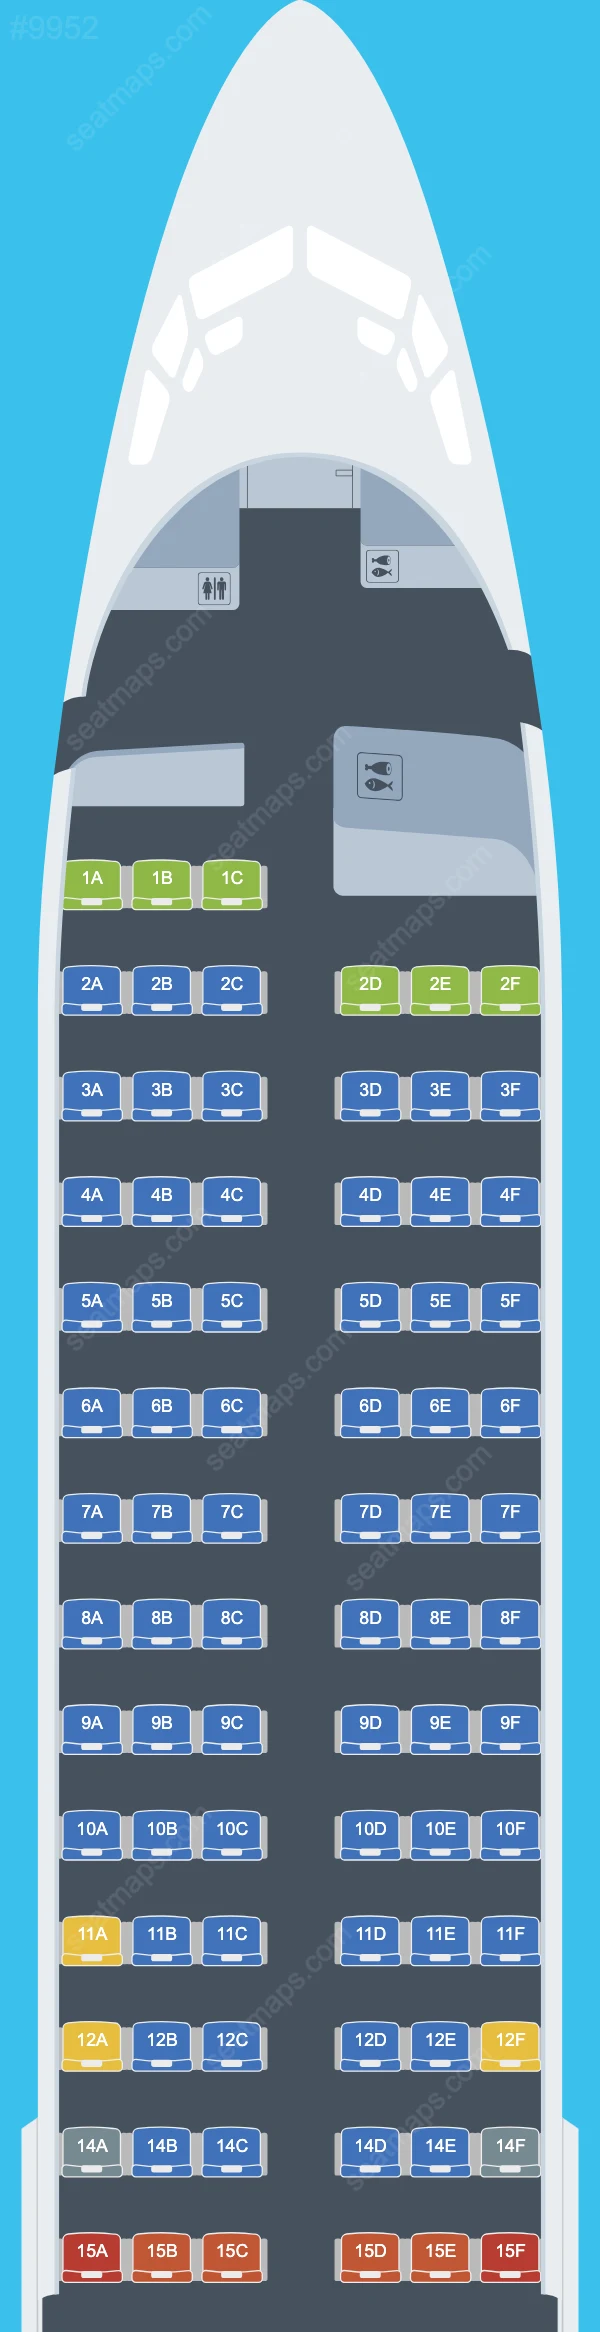 Firefly Boeing 737 Seat Maps 737-800